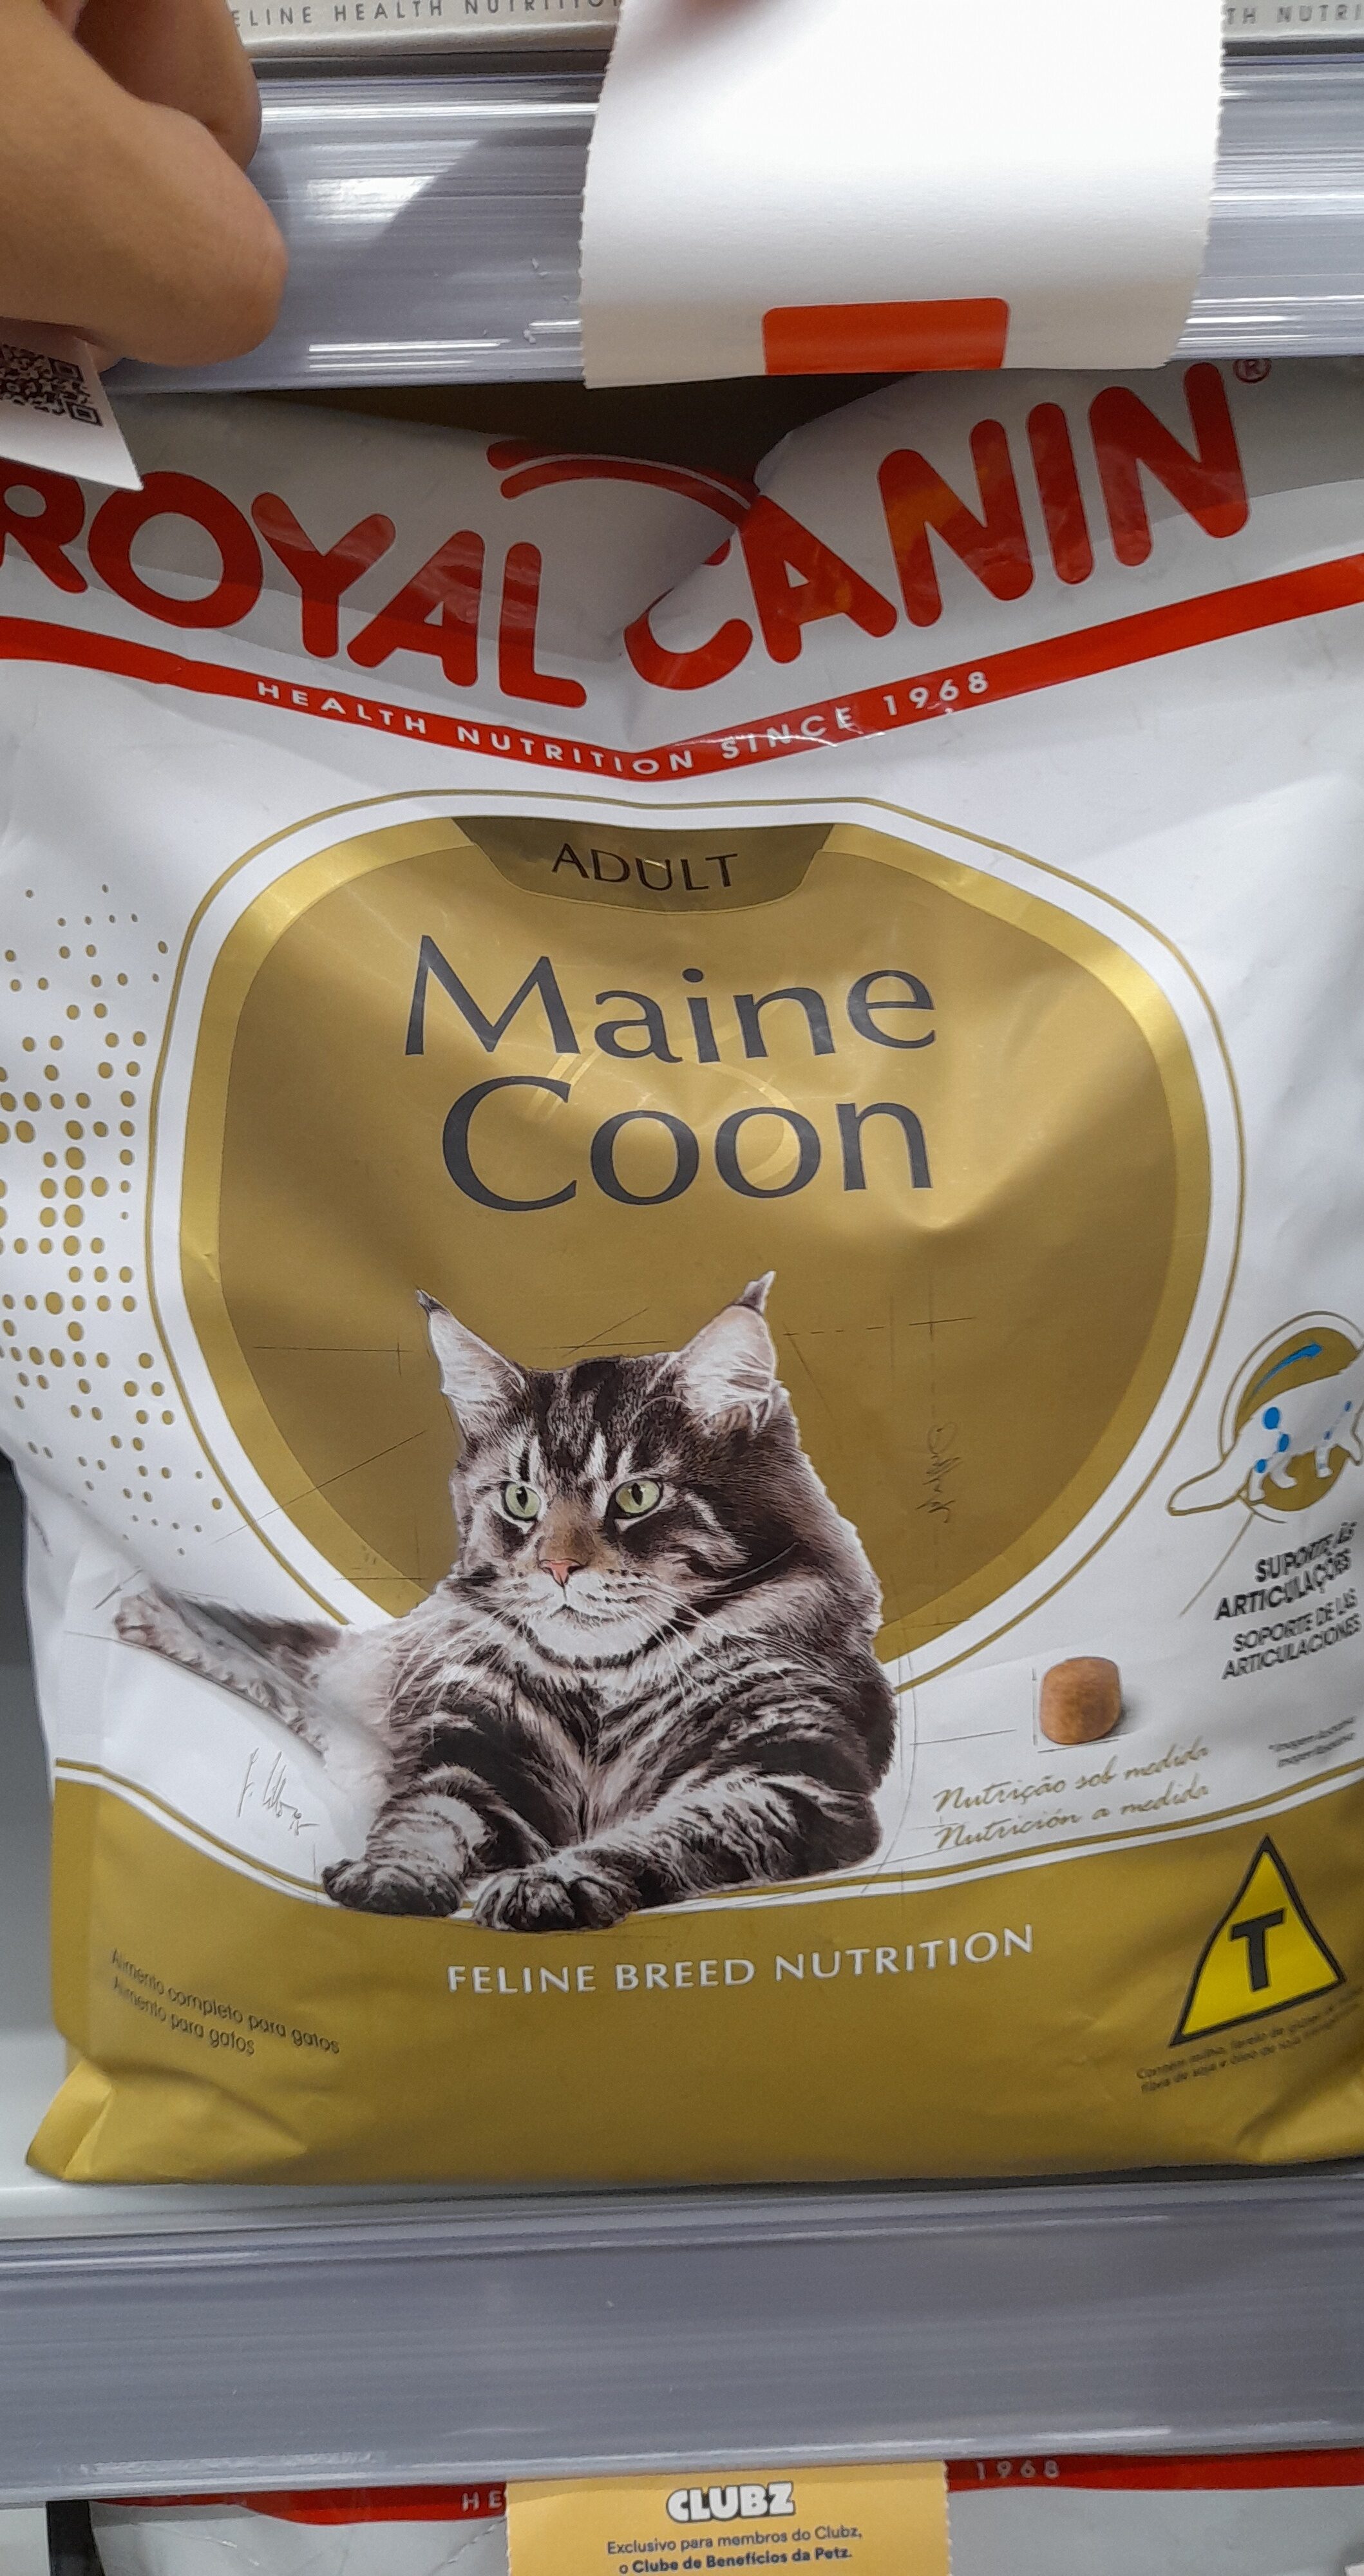 Royal canin maine coon - Product - pt